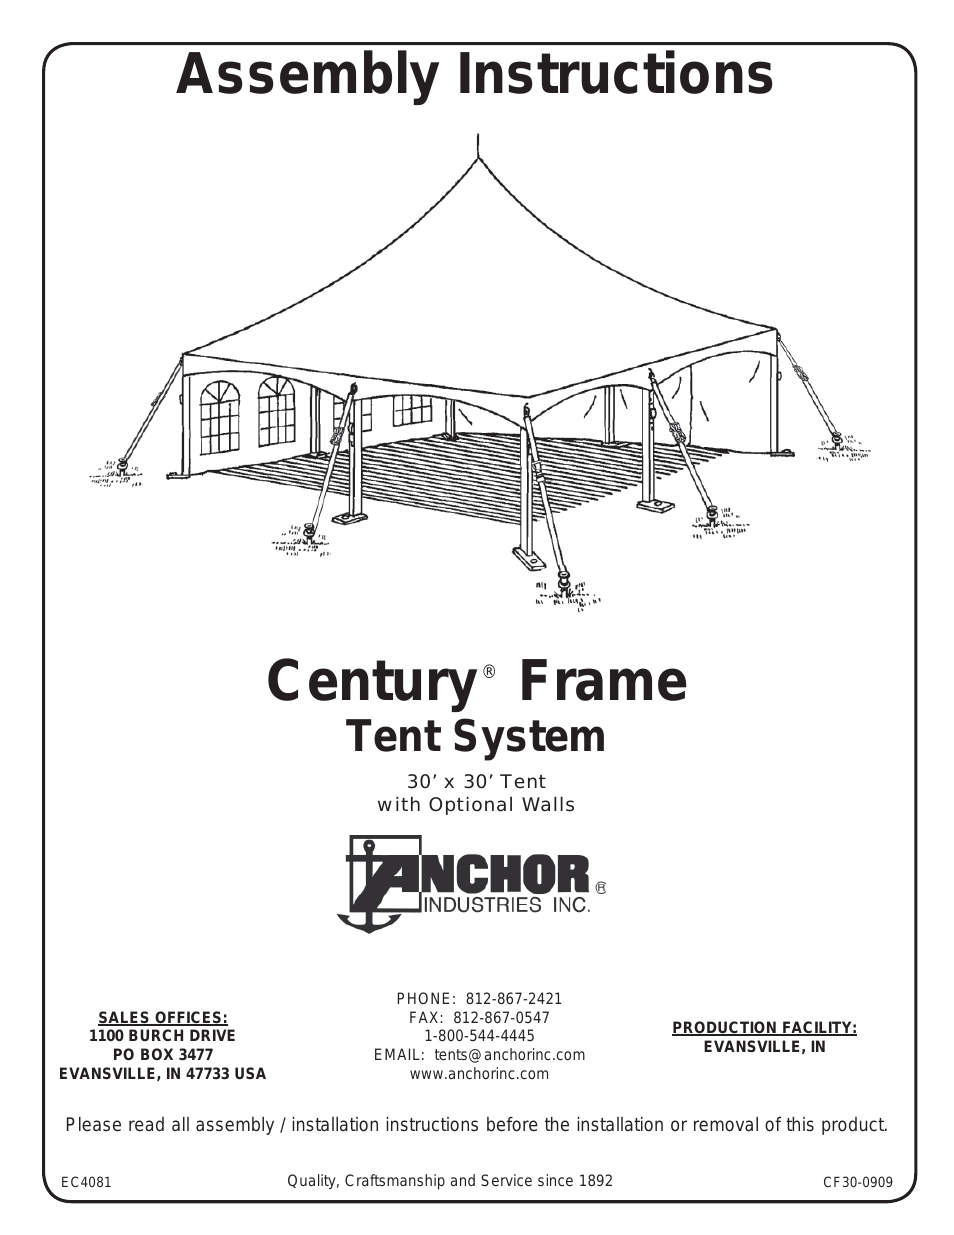 CENTURY FRAME TENTS 30X30 WITH OPTIONAL WALLS